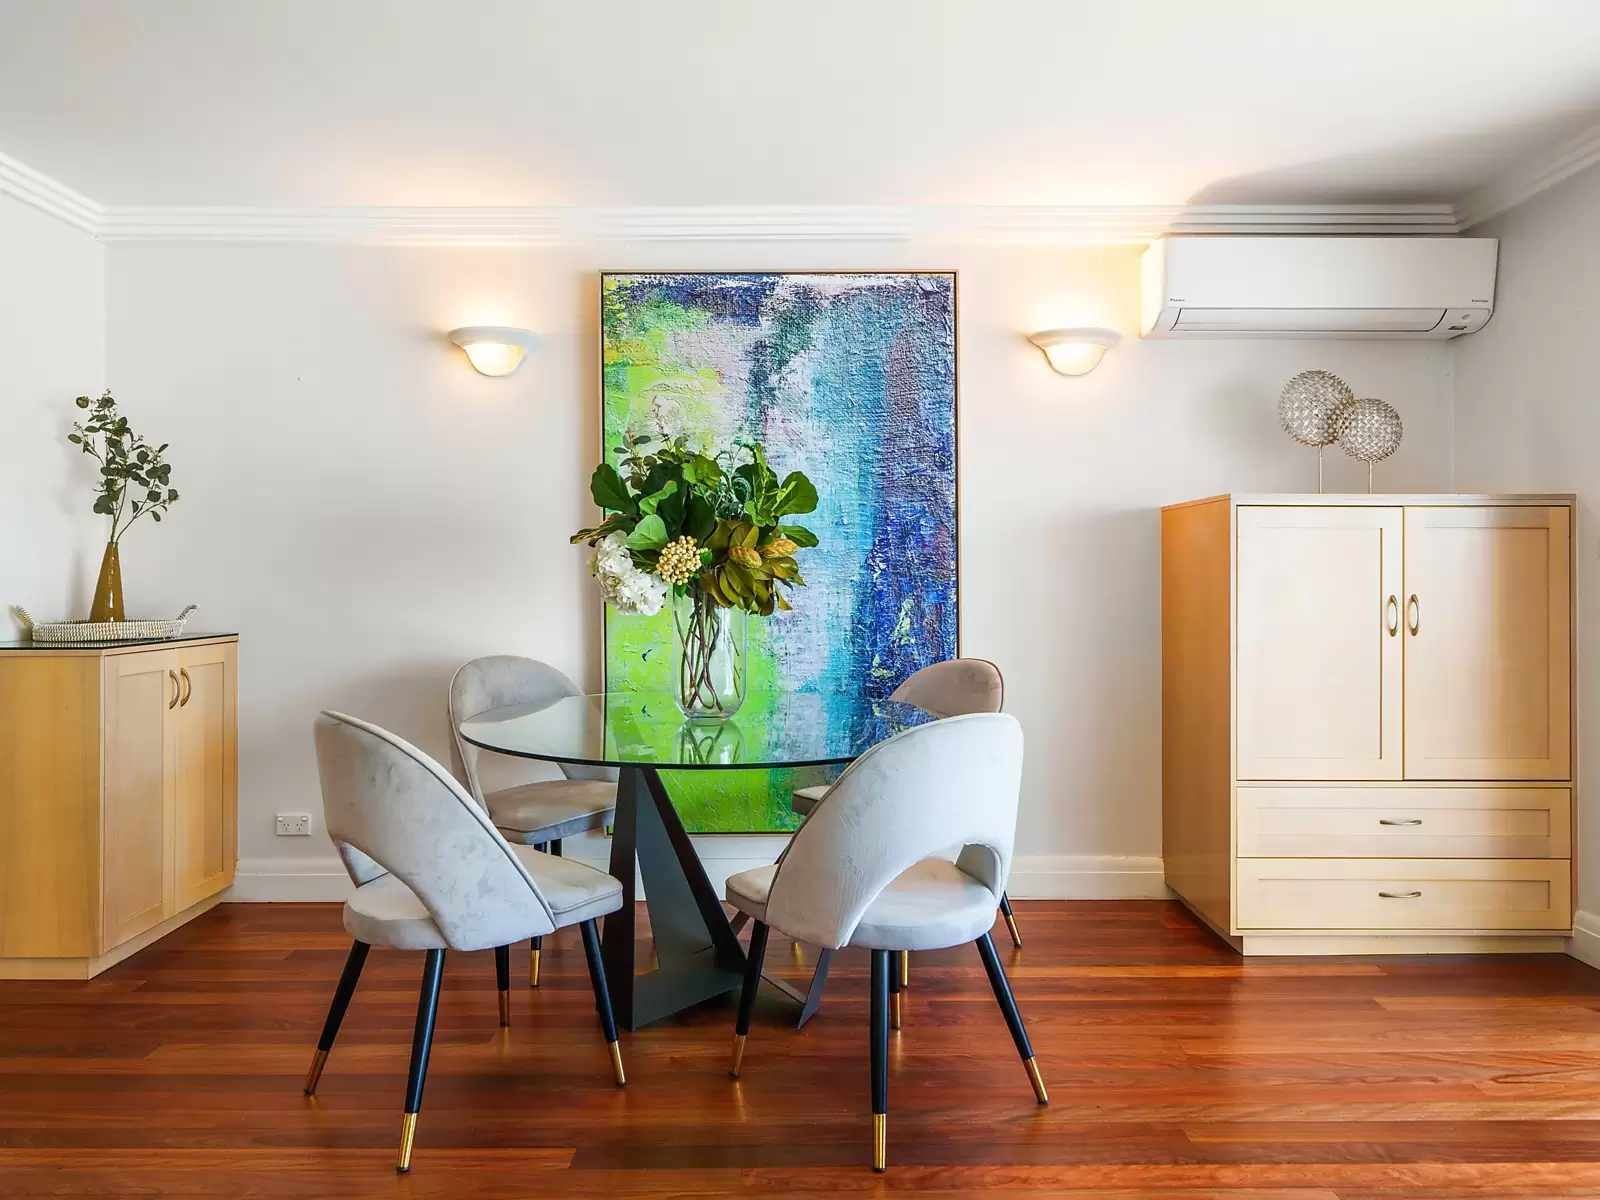 Photo #6: 25/16-18 Rosemont Avenue, Woollahra - Sold by Sydney Sotheby's International Realty